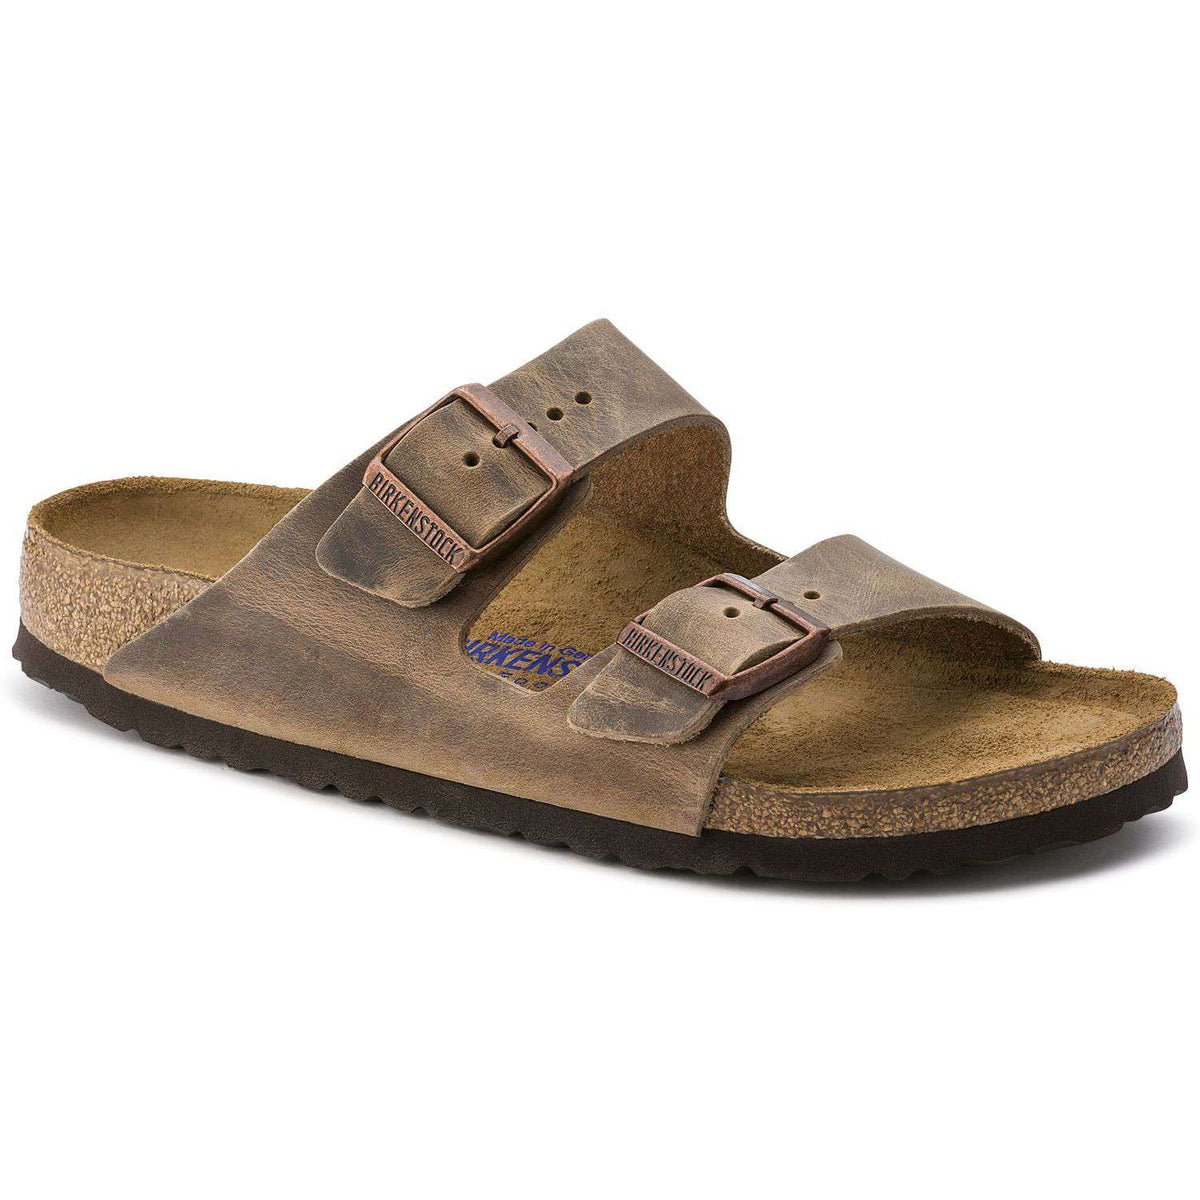 Women's Arizona Sandal in Oiled Tobacco Brown Leather with Soft Footbed by Birkenstock - Country Club Prep